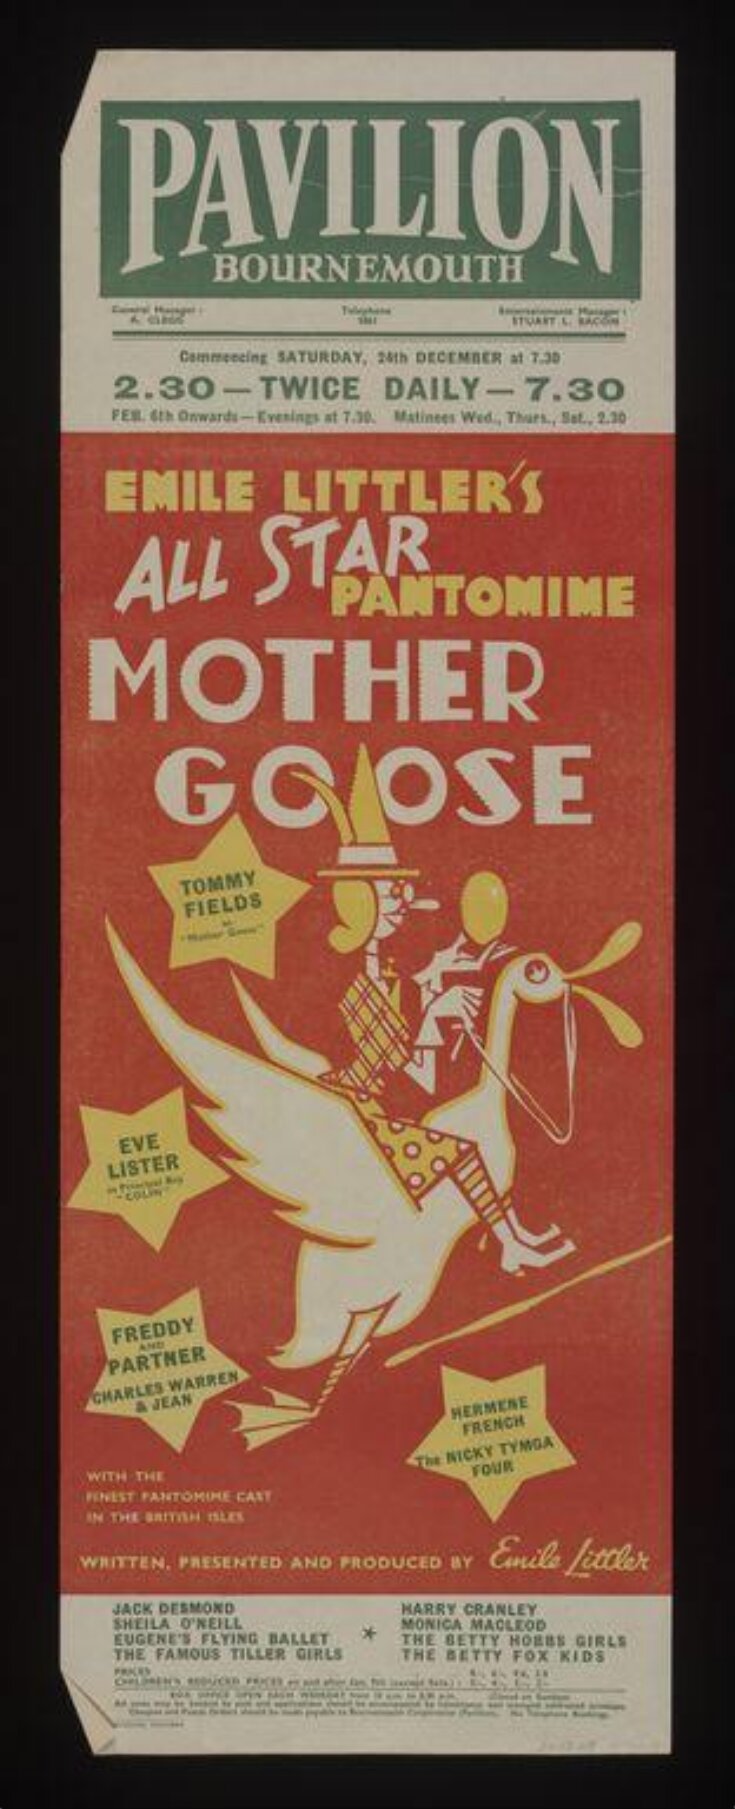 Mother Goose image